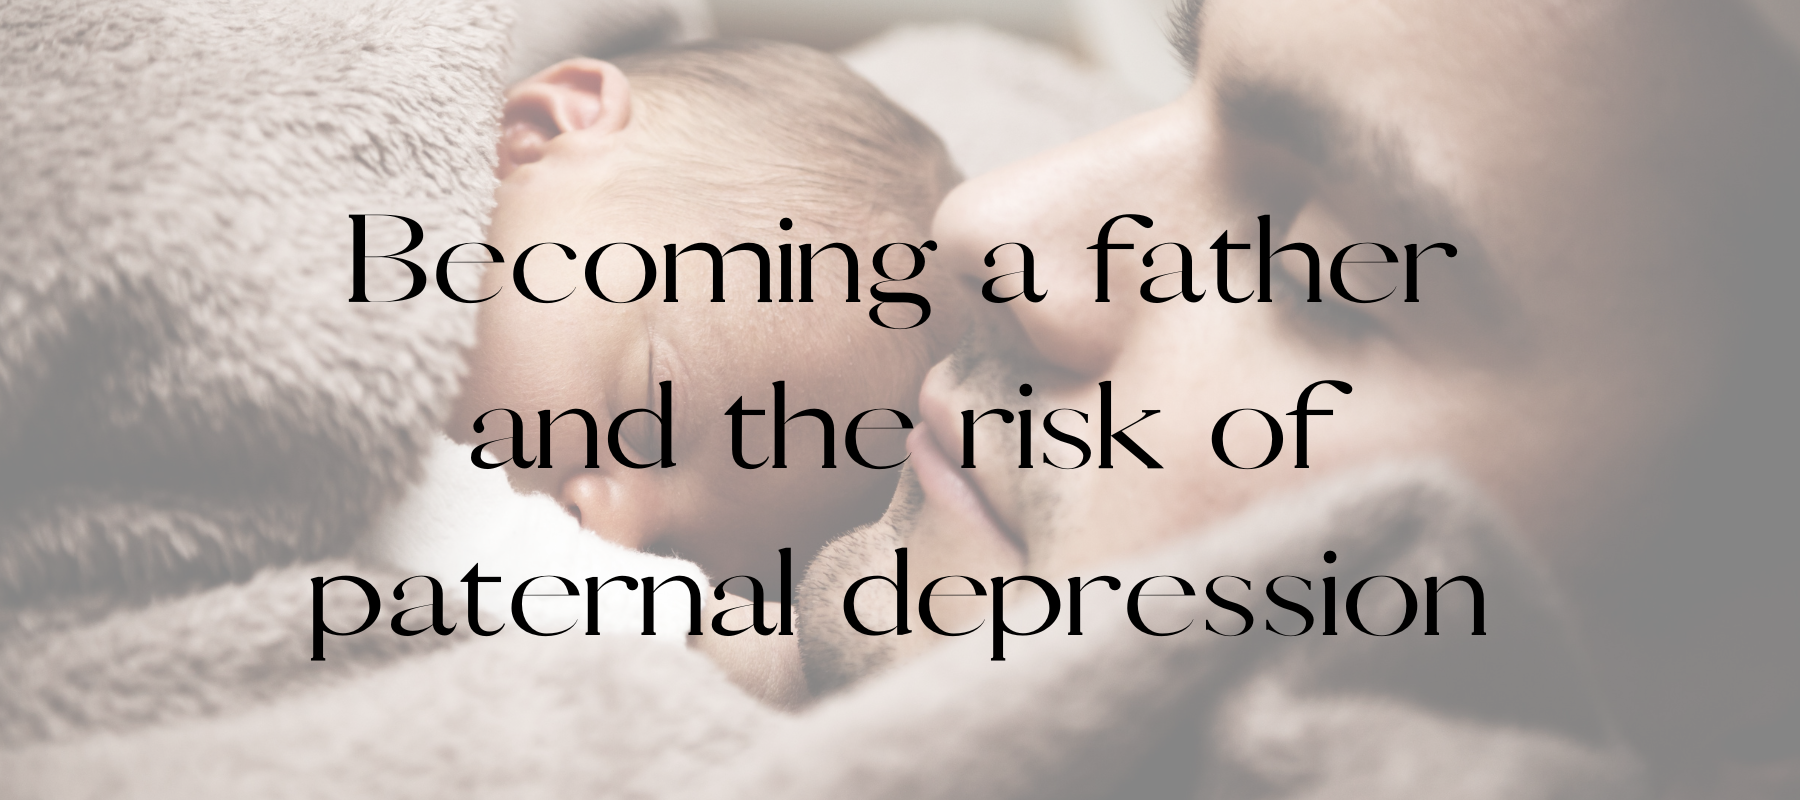 Becoming a father & the risk of paternal depression